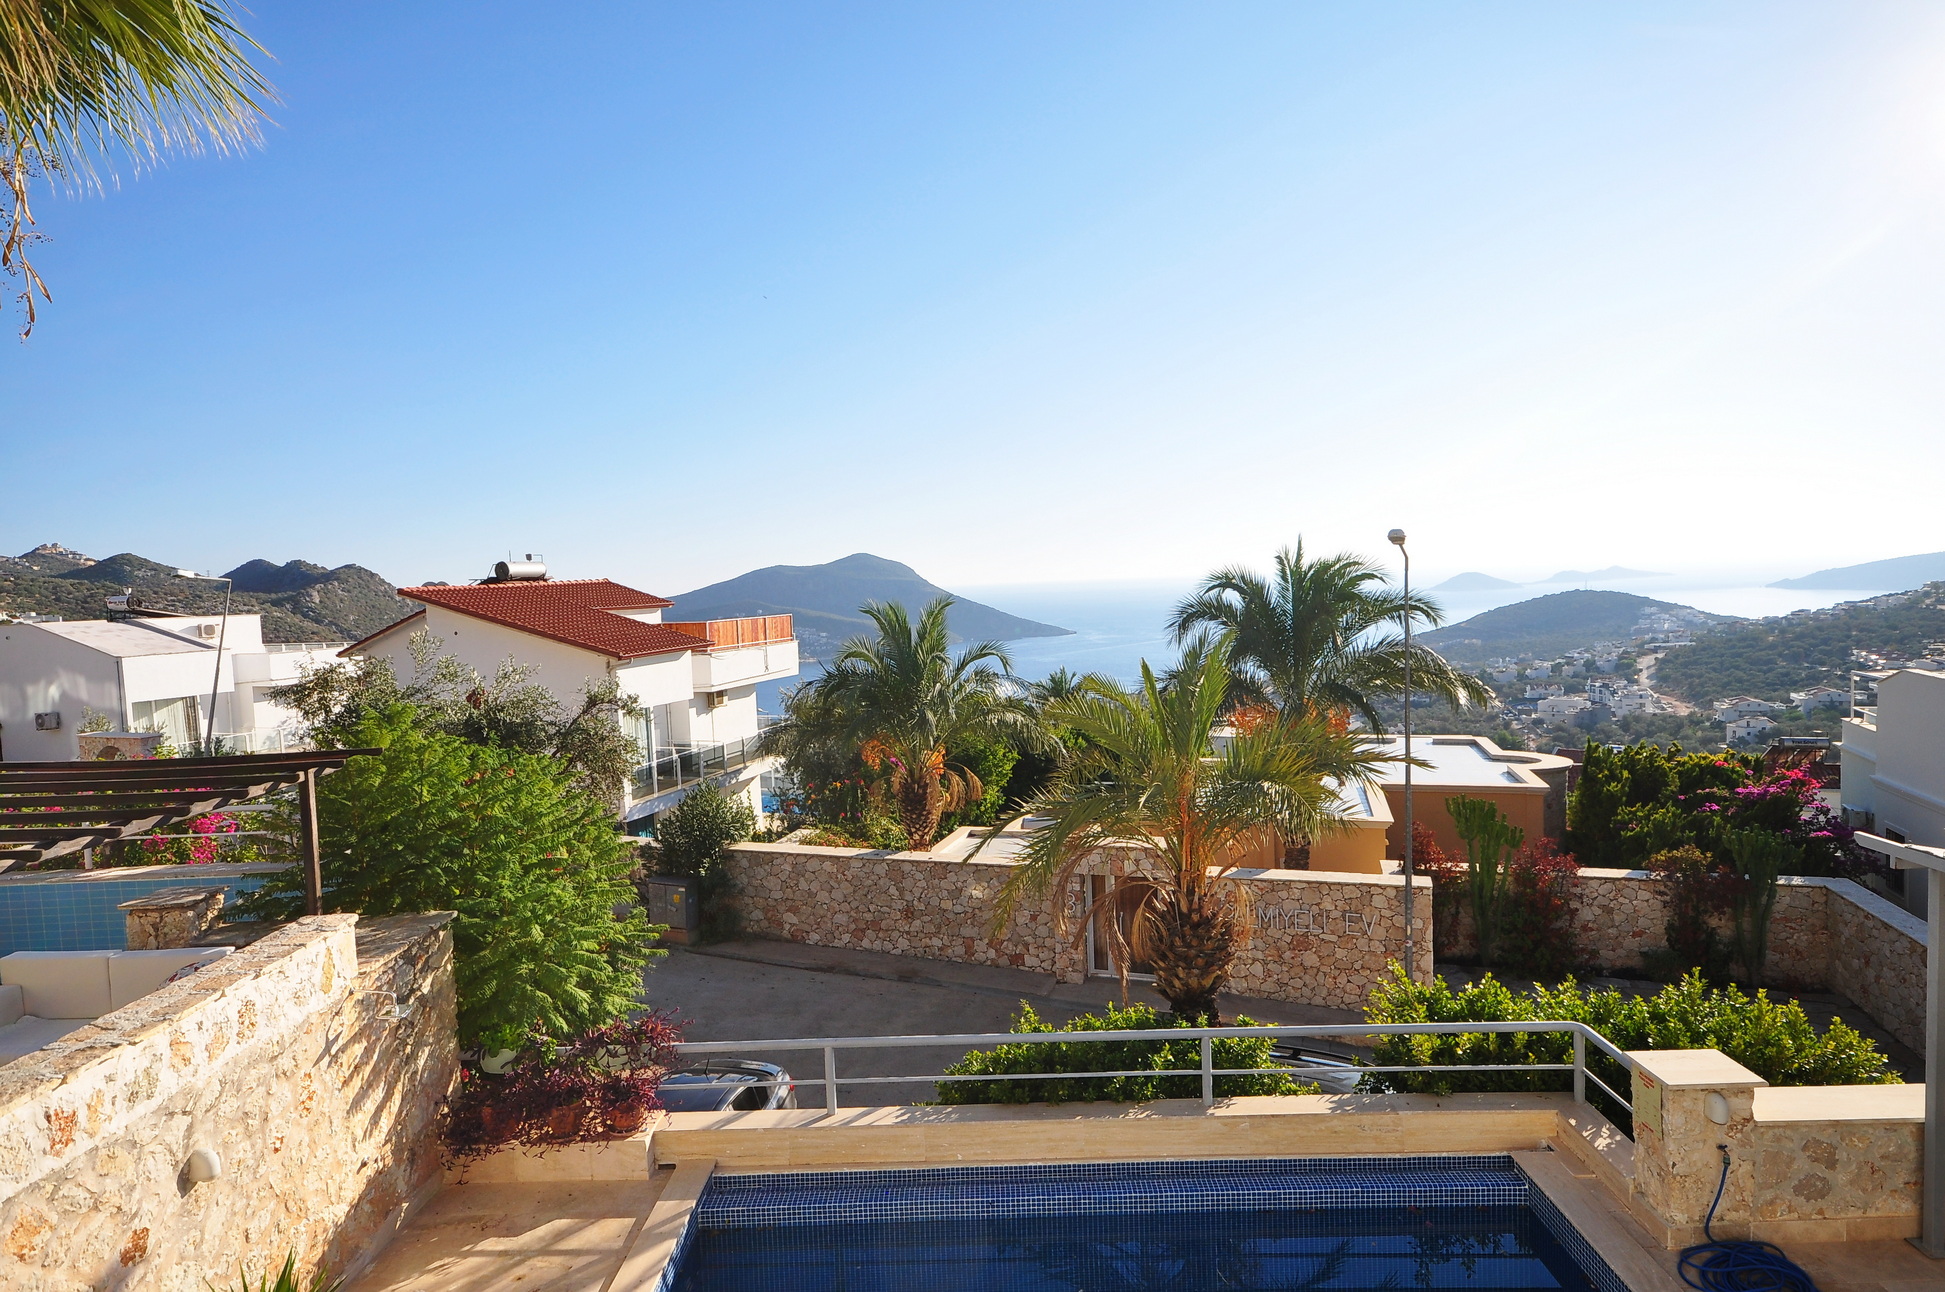 3 Bedroom Detached Villa with Private Swimming Pool in Kalkan